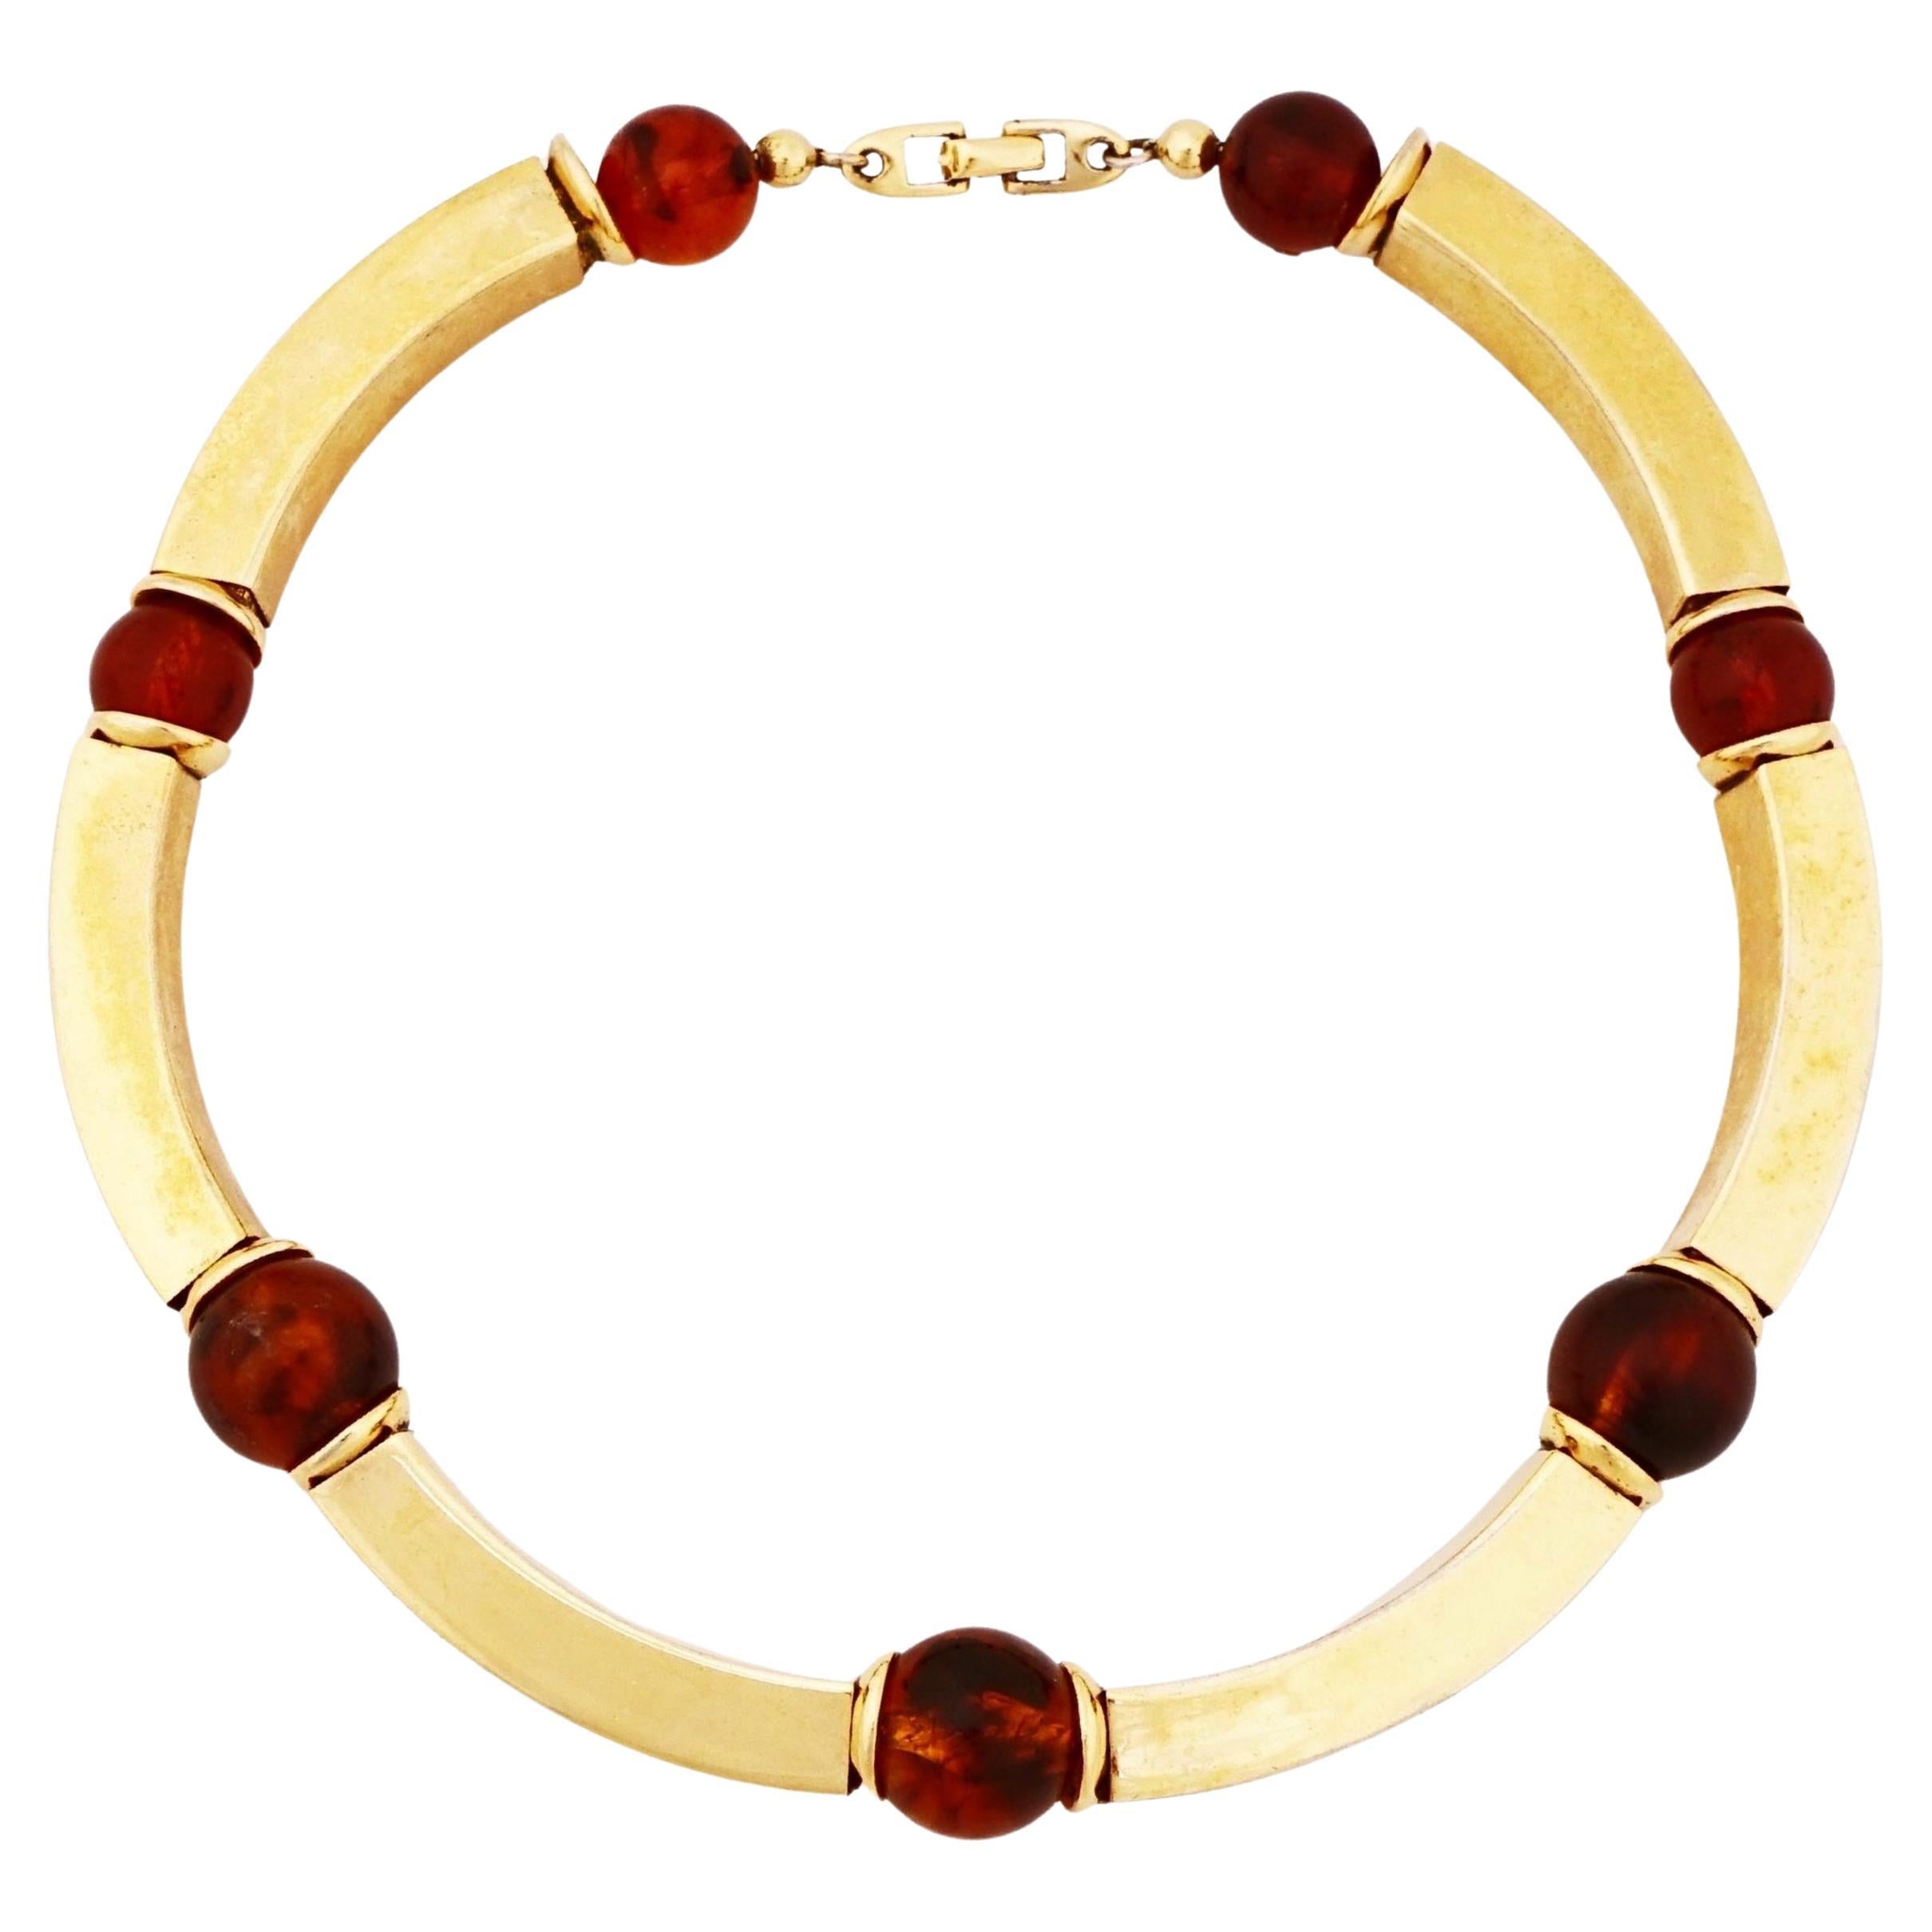 Gold Link Choker Necklace With Lucite Tortoise Beads By Napier, 1970s